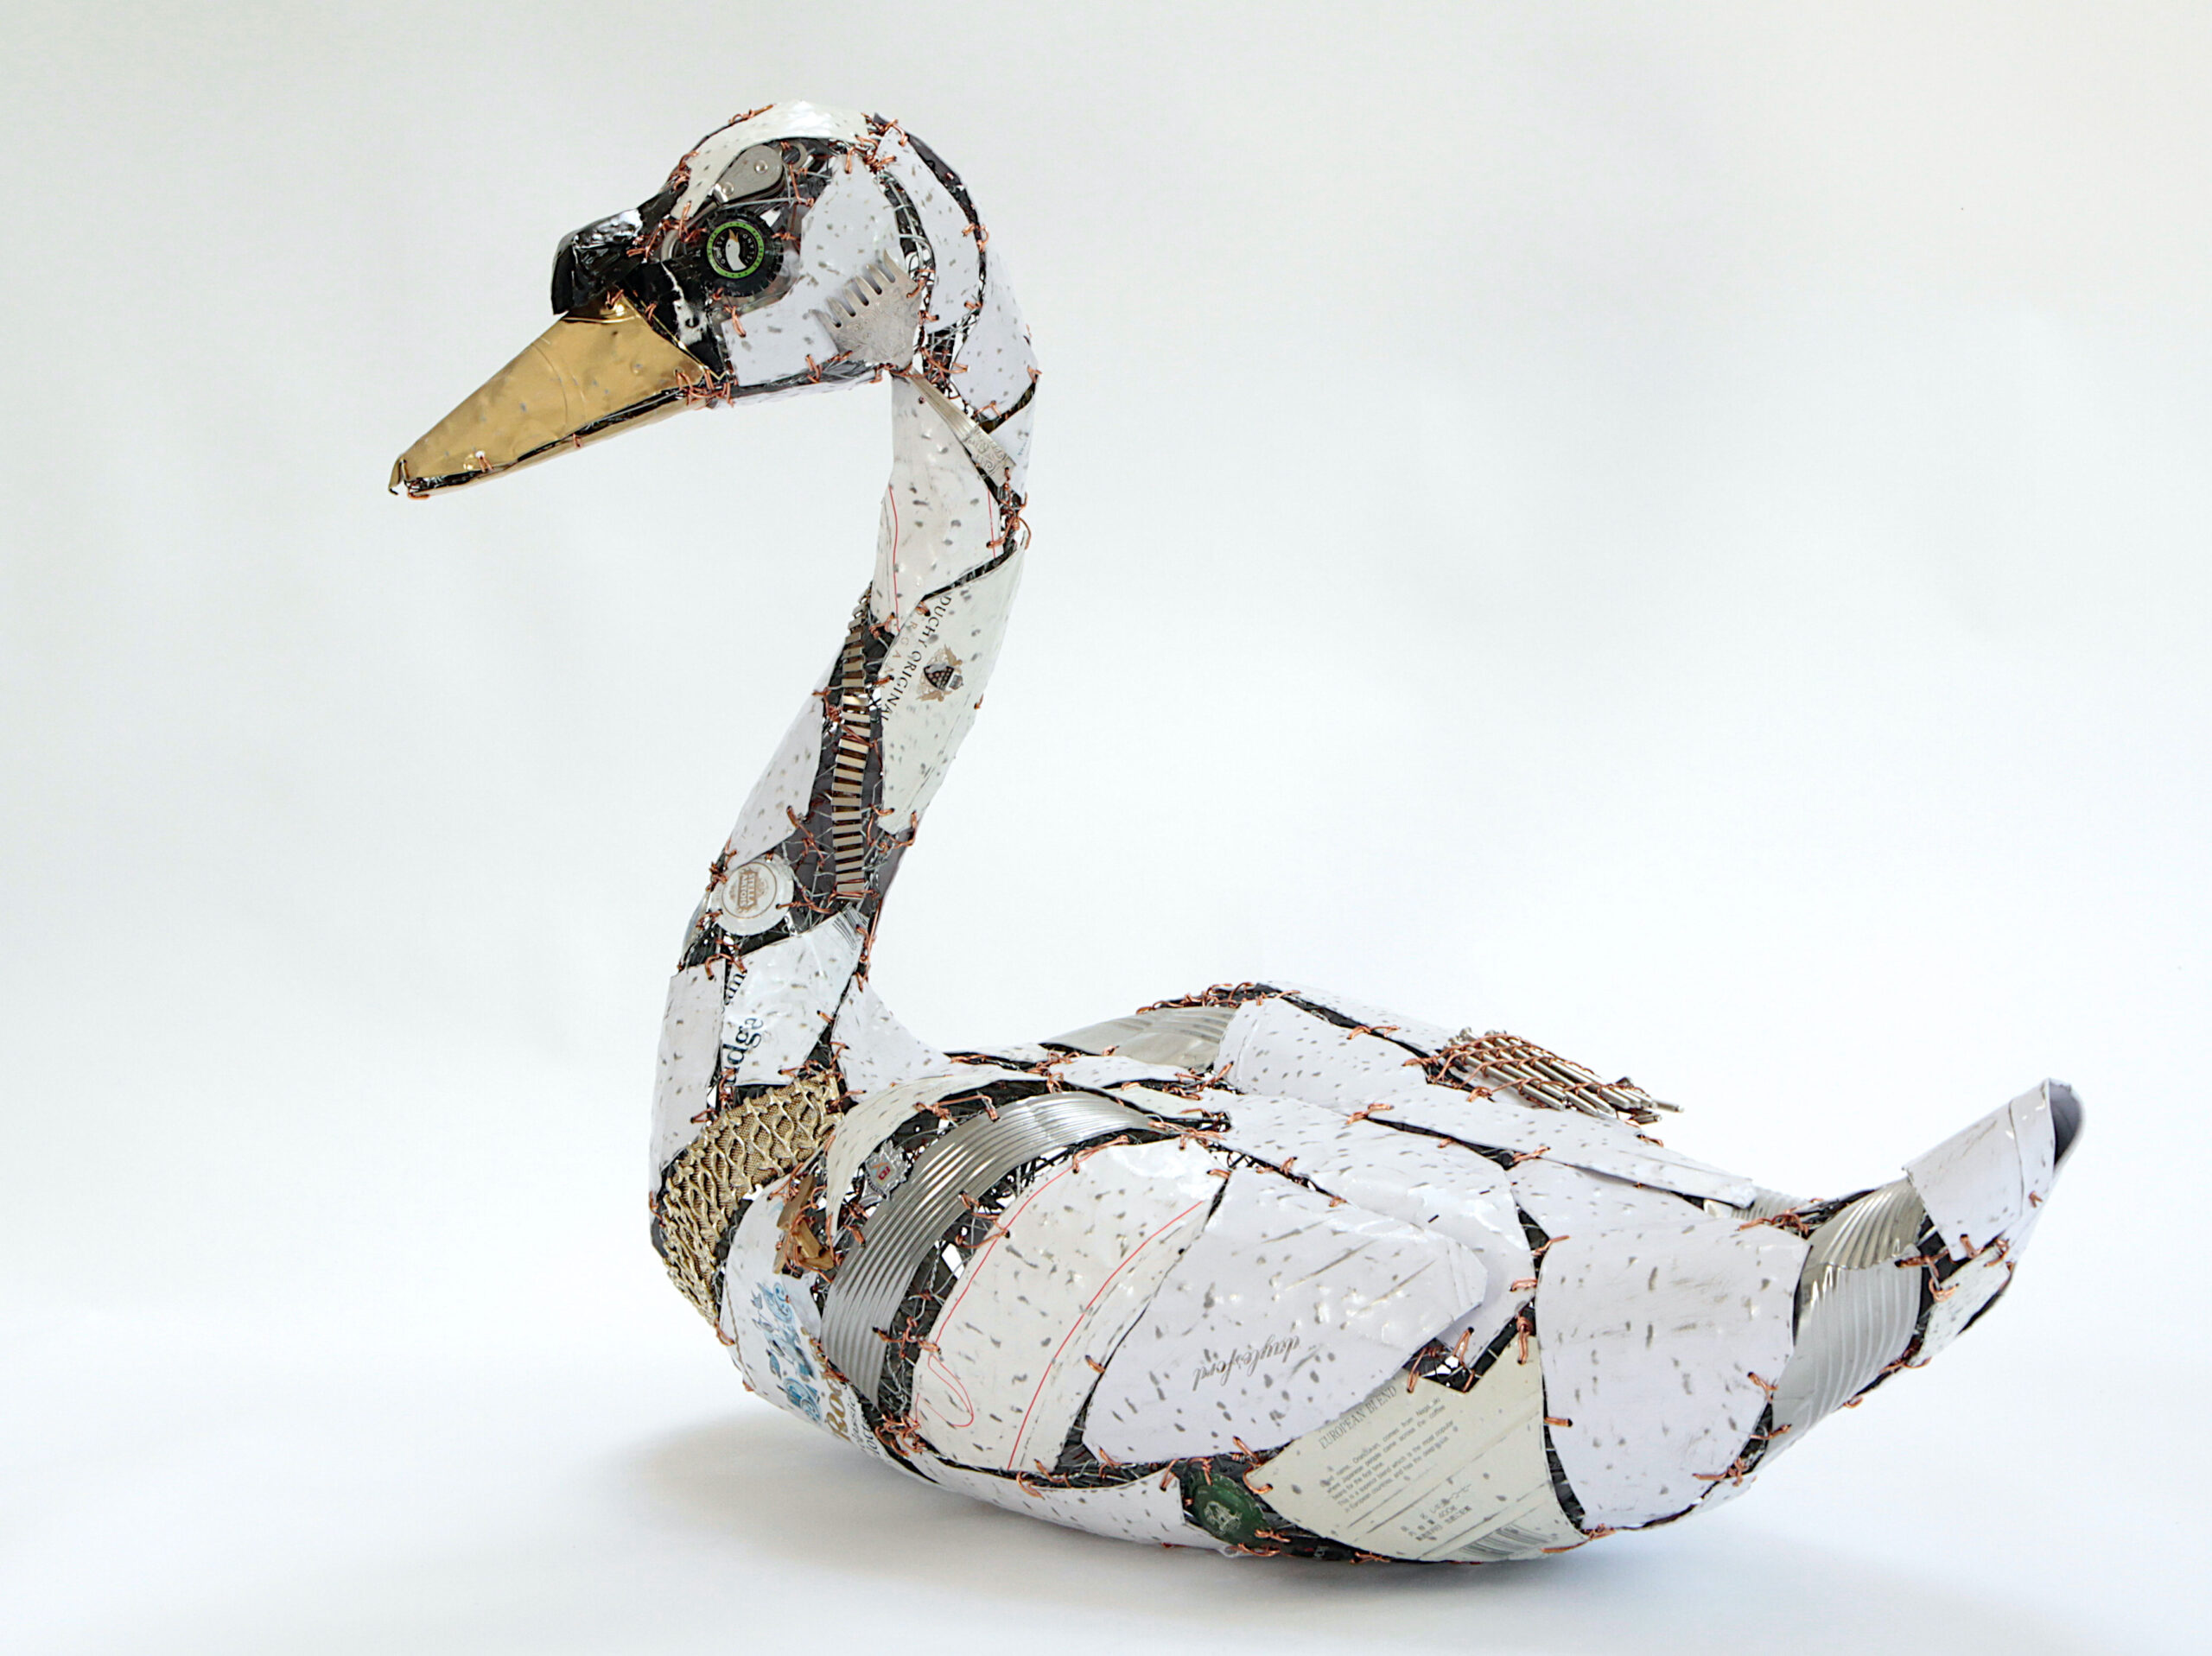 Recycled Scraps and Discarded Objects Are Fashioned Into an Eccentric Menagerie of Metal Animals | 国外美陈 美陈网站 美陈前沿 